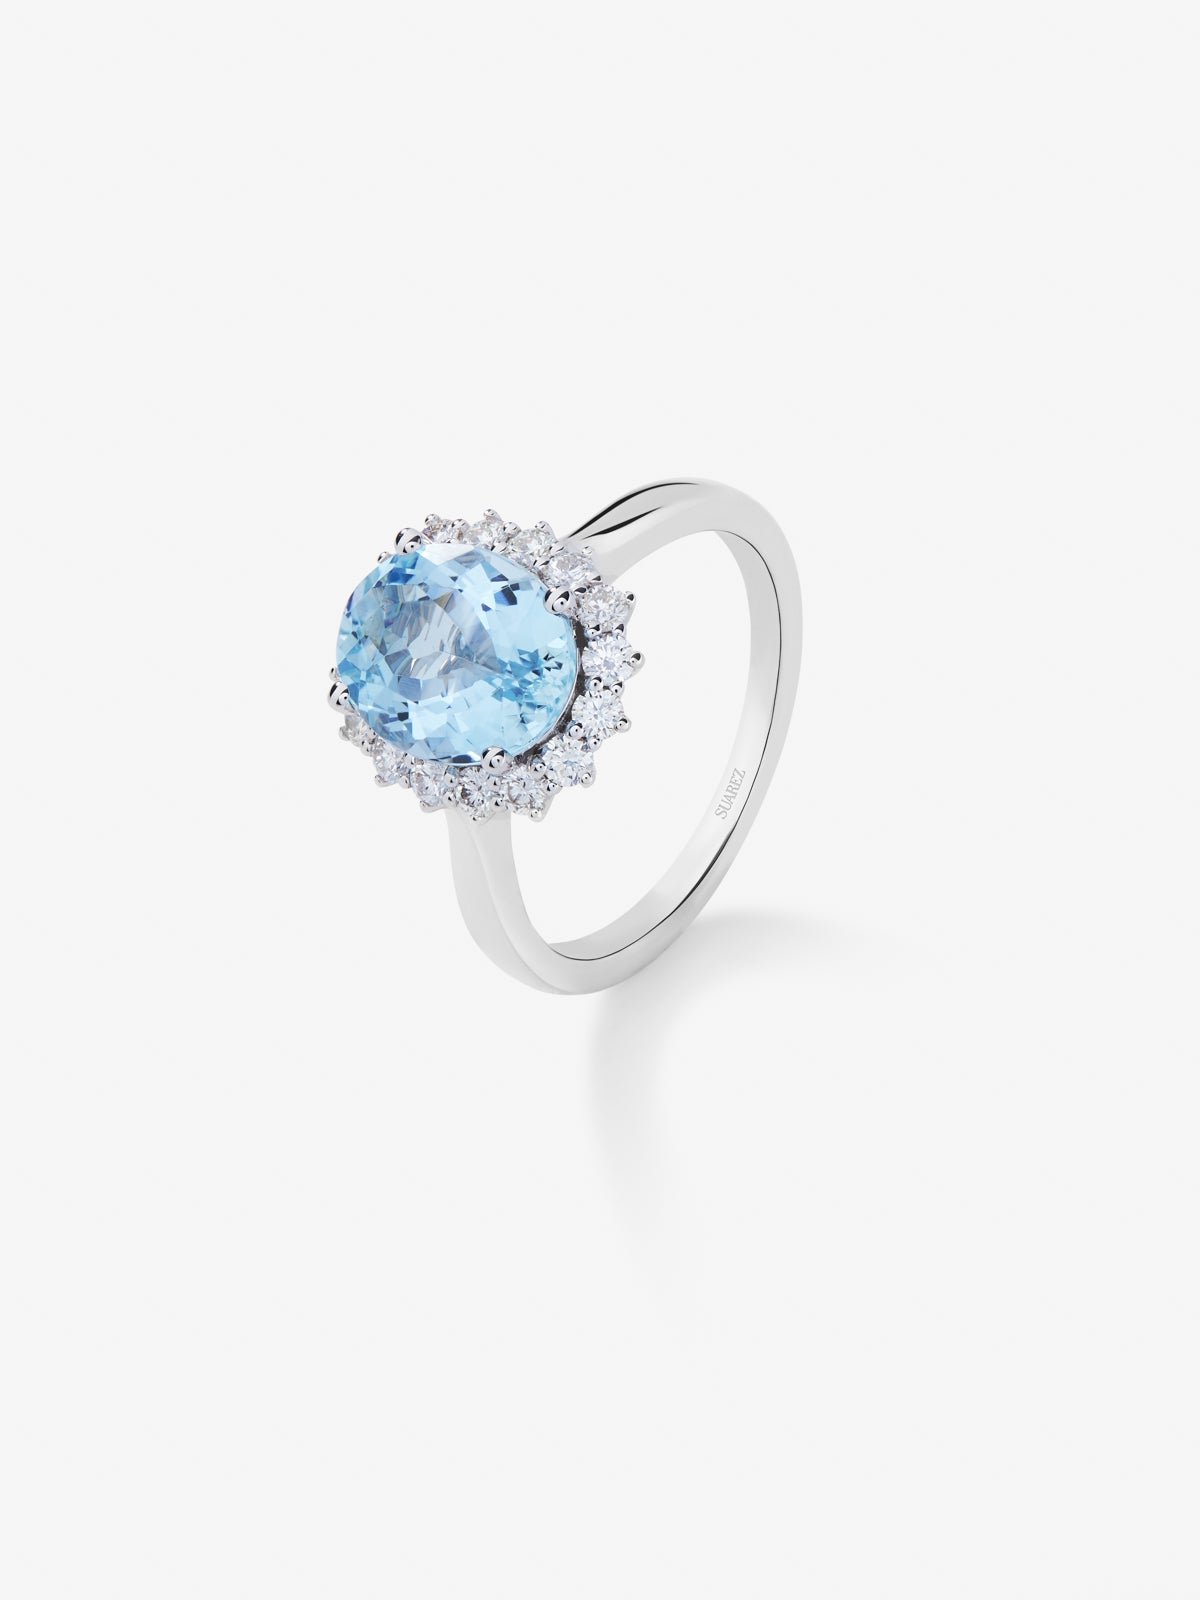 18K white gold ring with oval-cut aquamarine of 2.74 cts and 16 brilliant-cut diamonds with a total of 0.59 cts